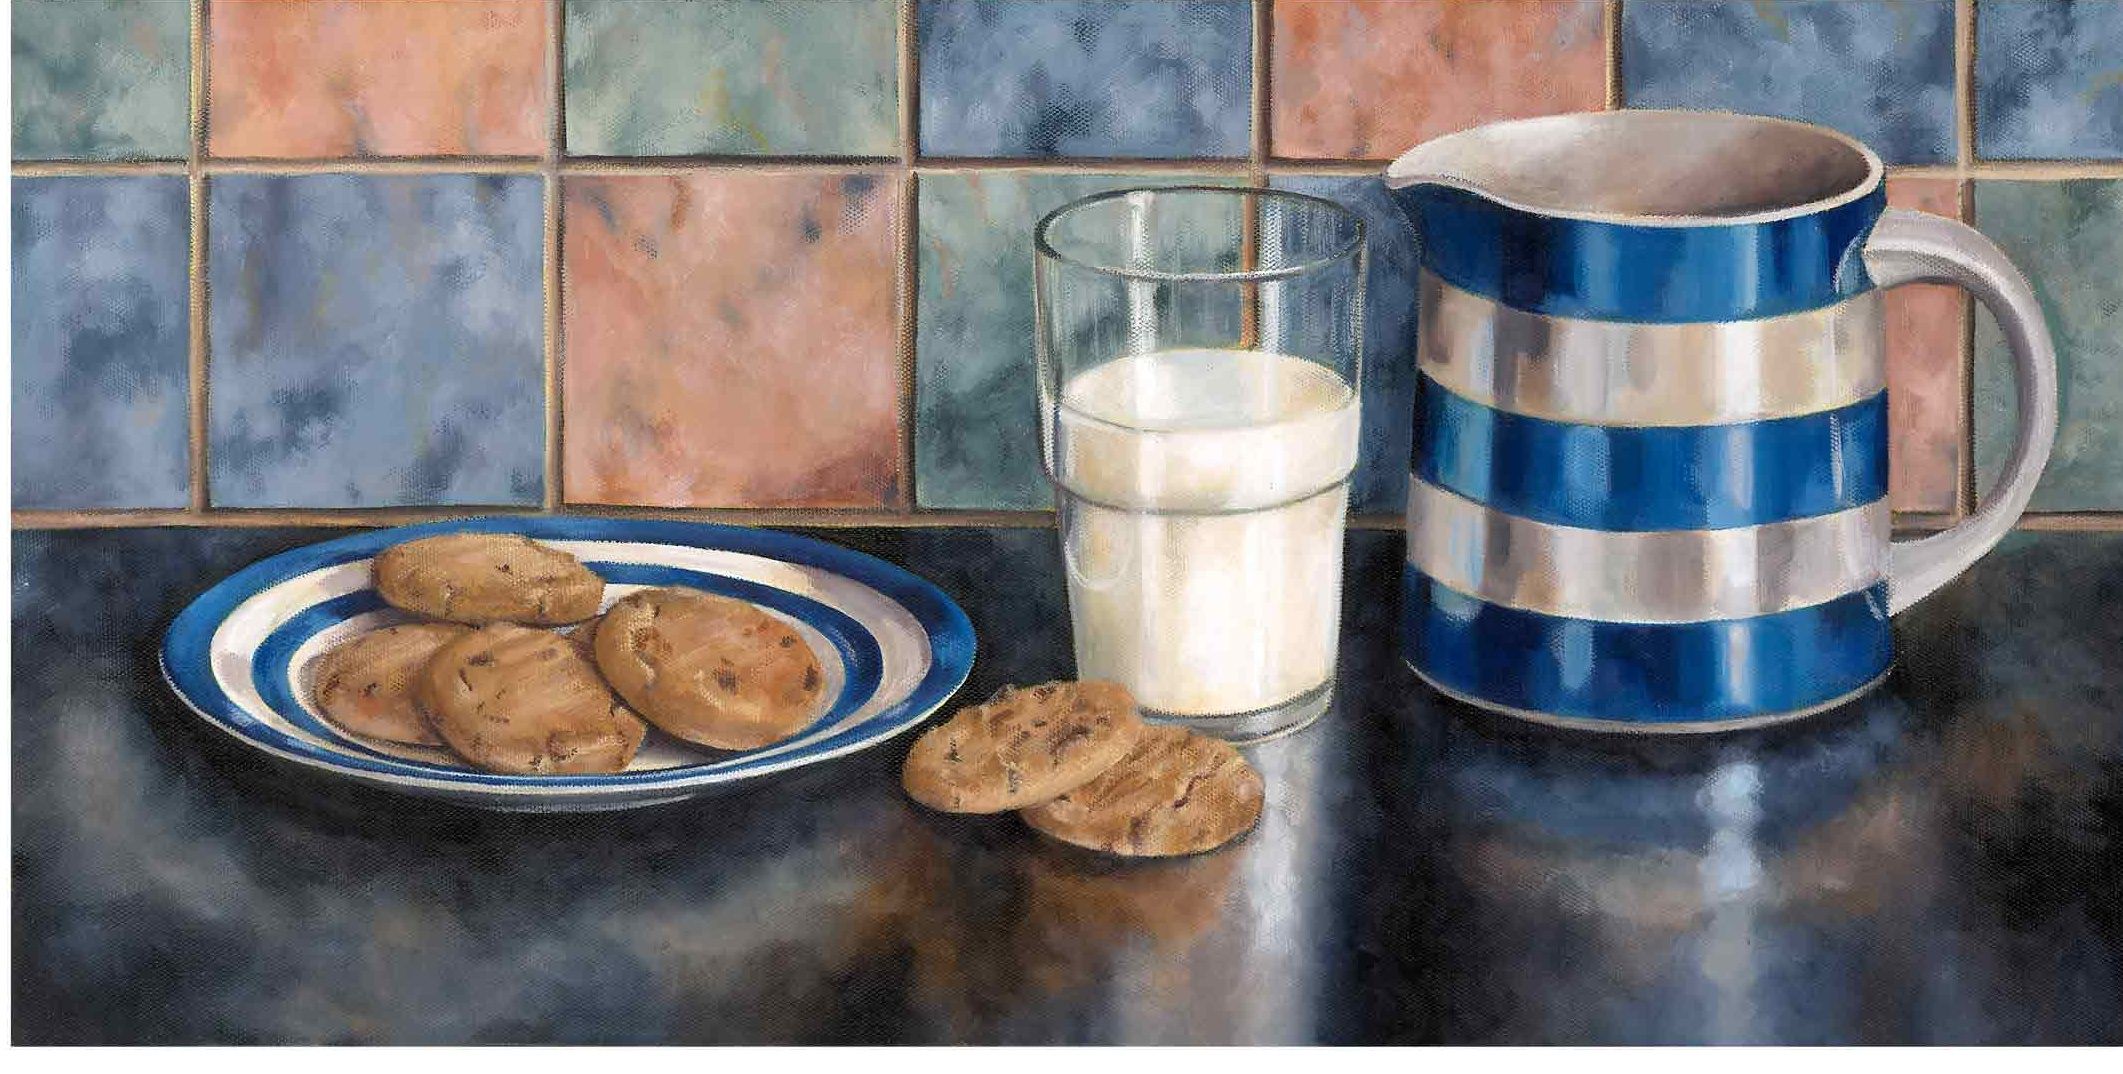 Milk and cookies before bed by Lisa Bloomer